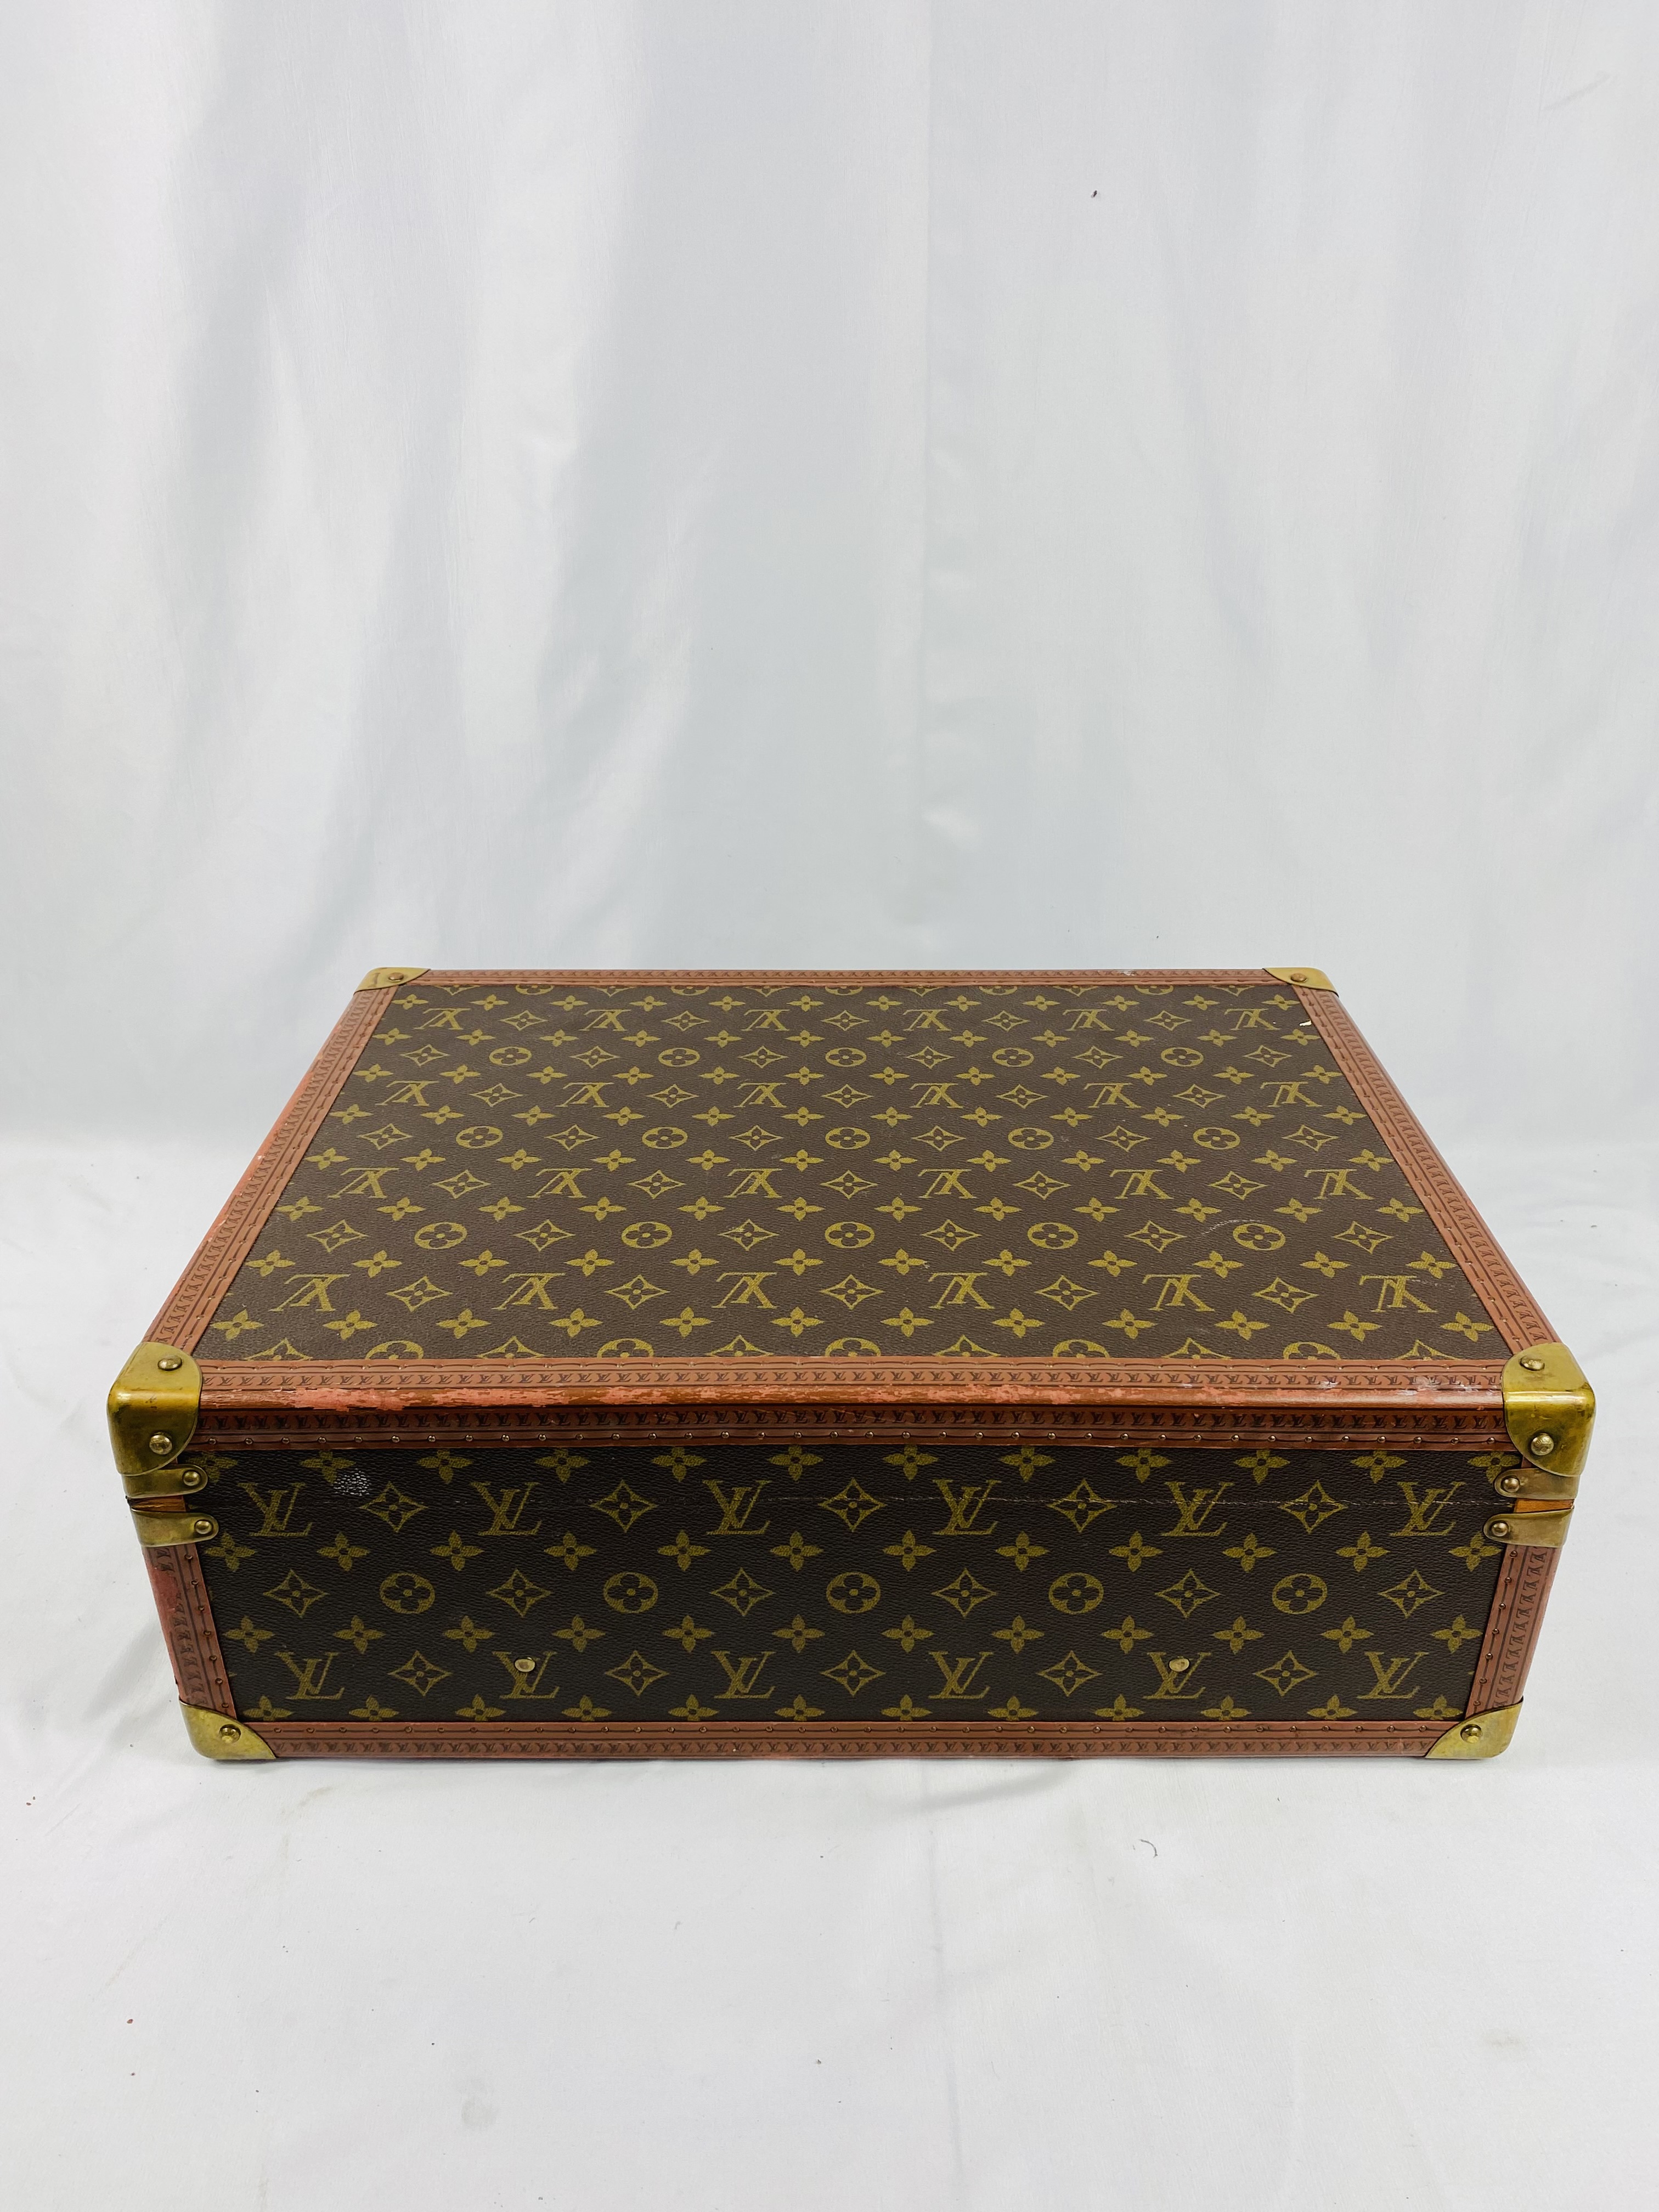 Louis Vuitton suitcase with protective cover - Image 9 of 10